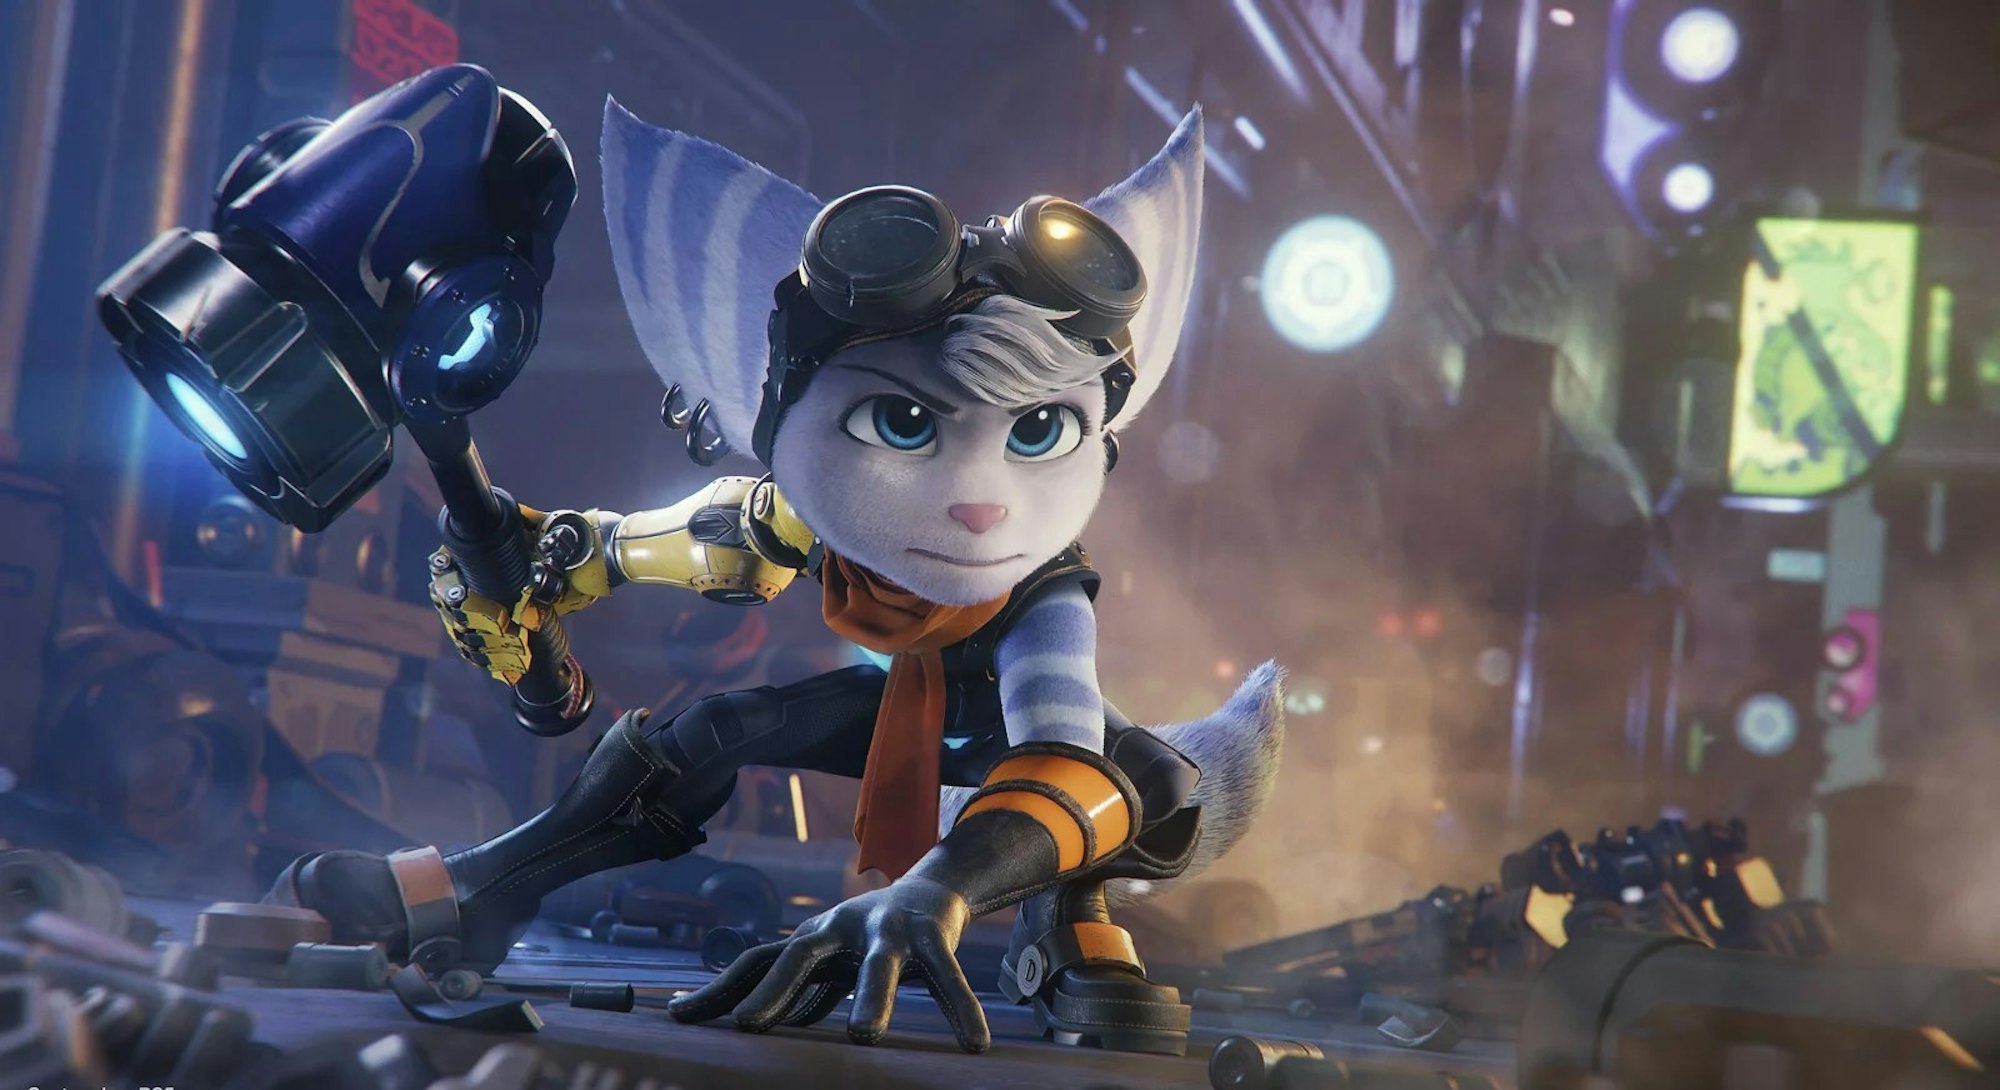 screenshot from Ratchet and Clank Rift Apart